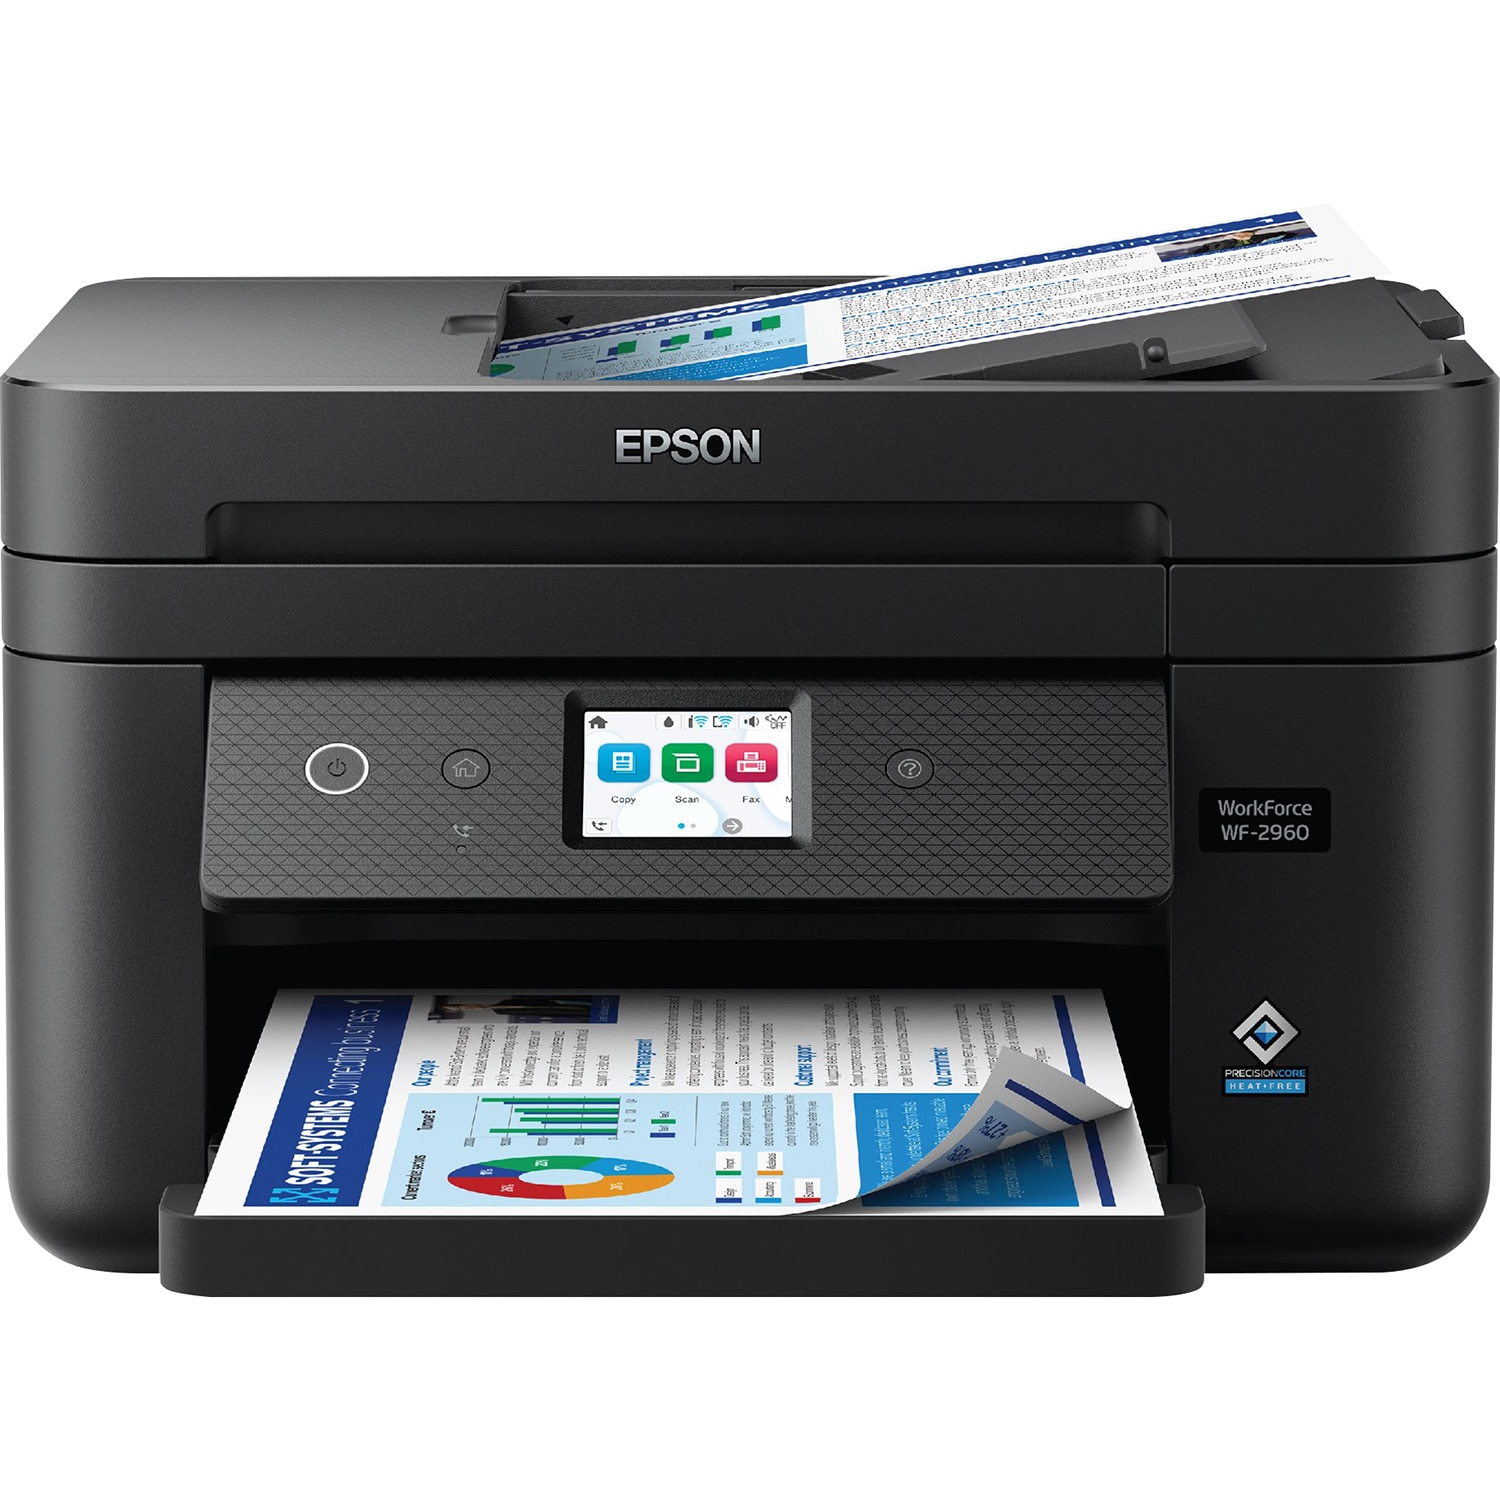 Dell Epson WorkForce WF-2960 All-in-One Printer